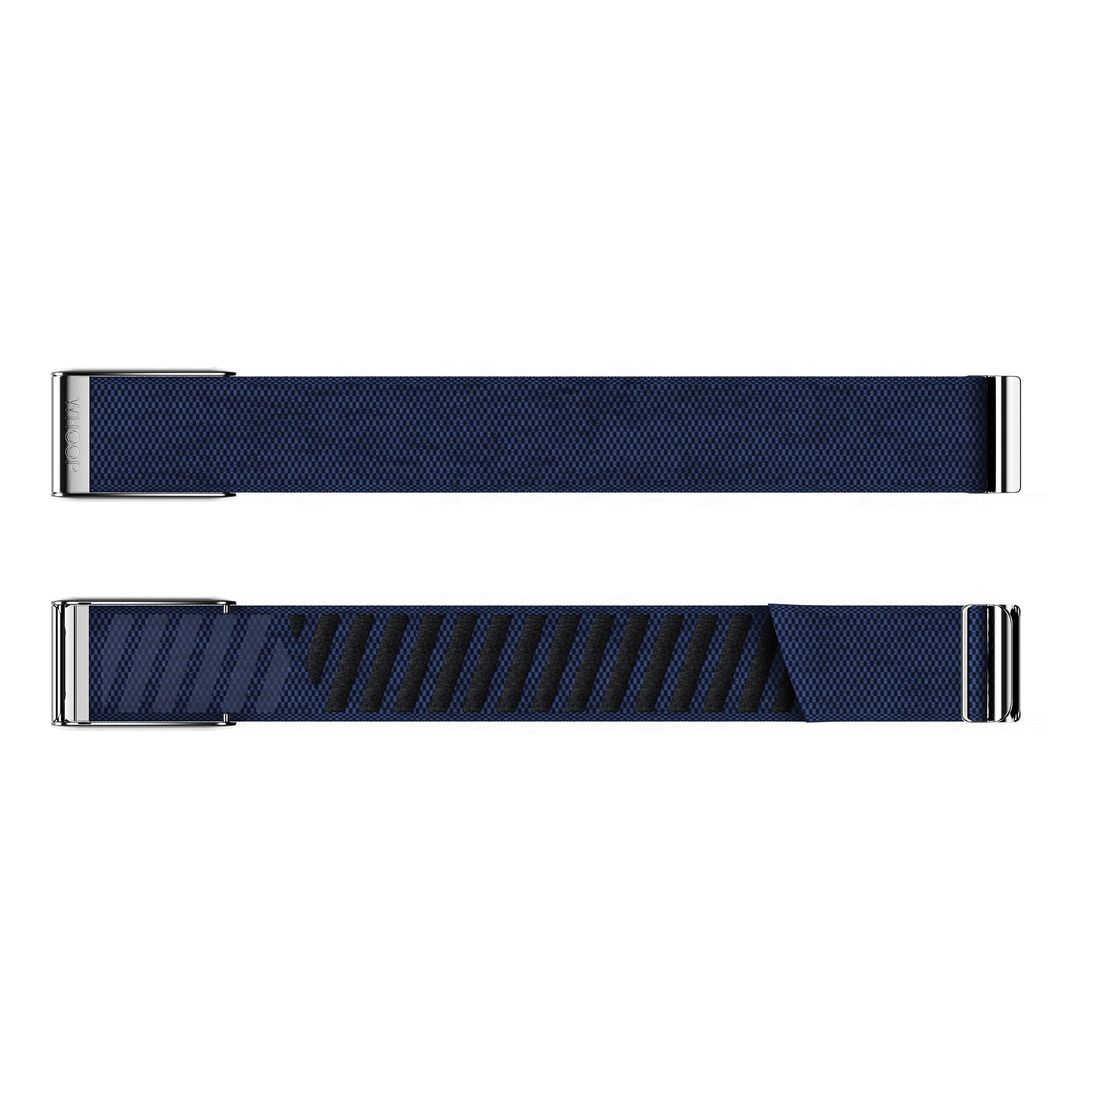 WHOOP Ultra-Soft SuperKnit Wristband for WHOOP 4.0 - Midnight & Platinum